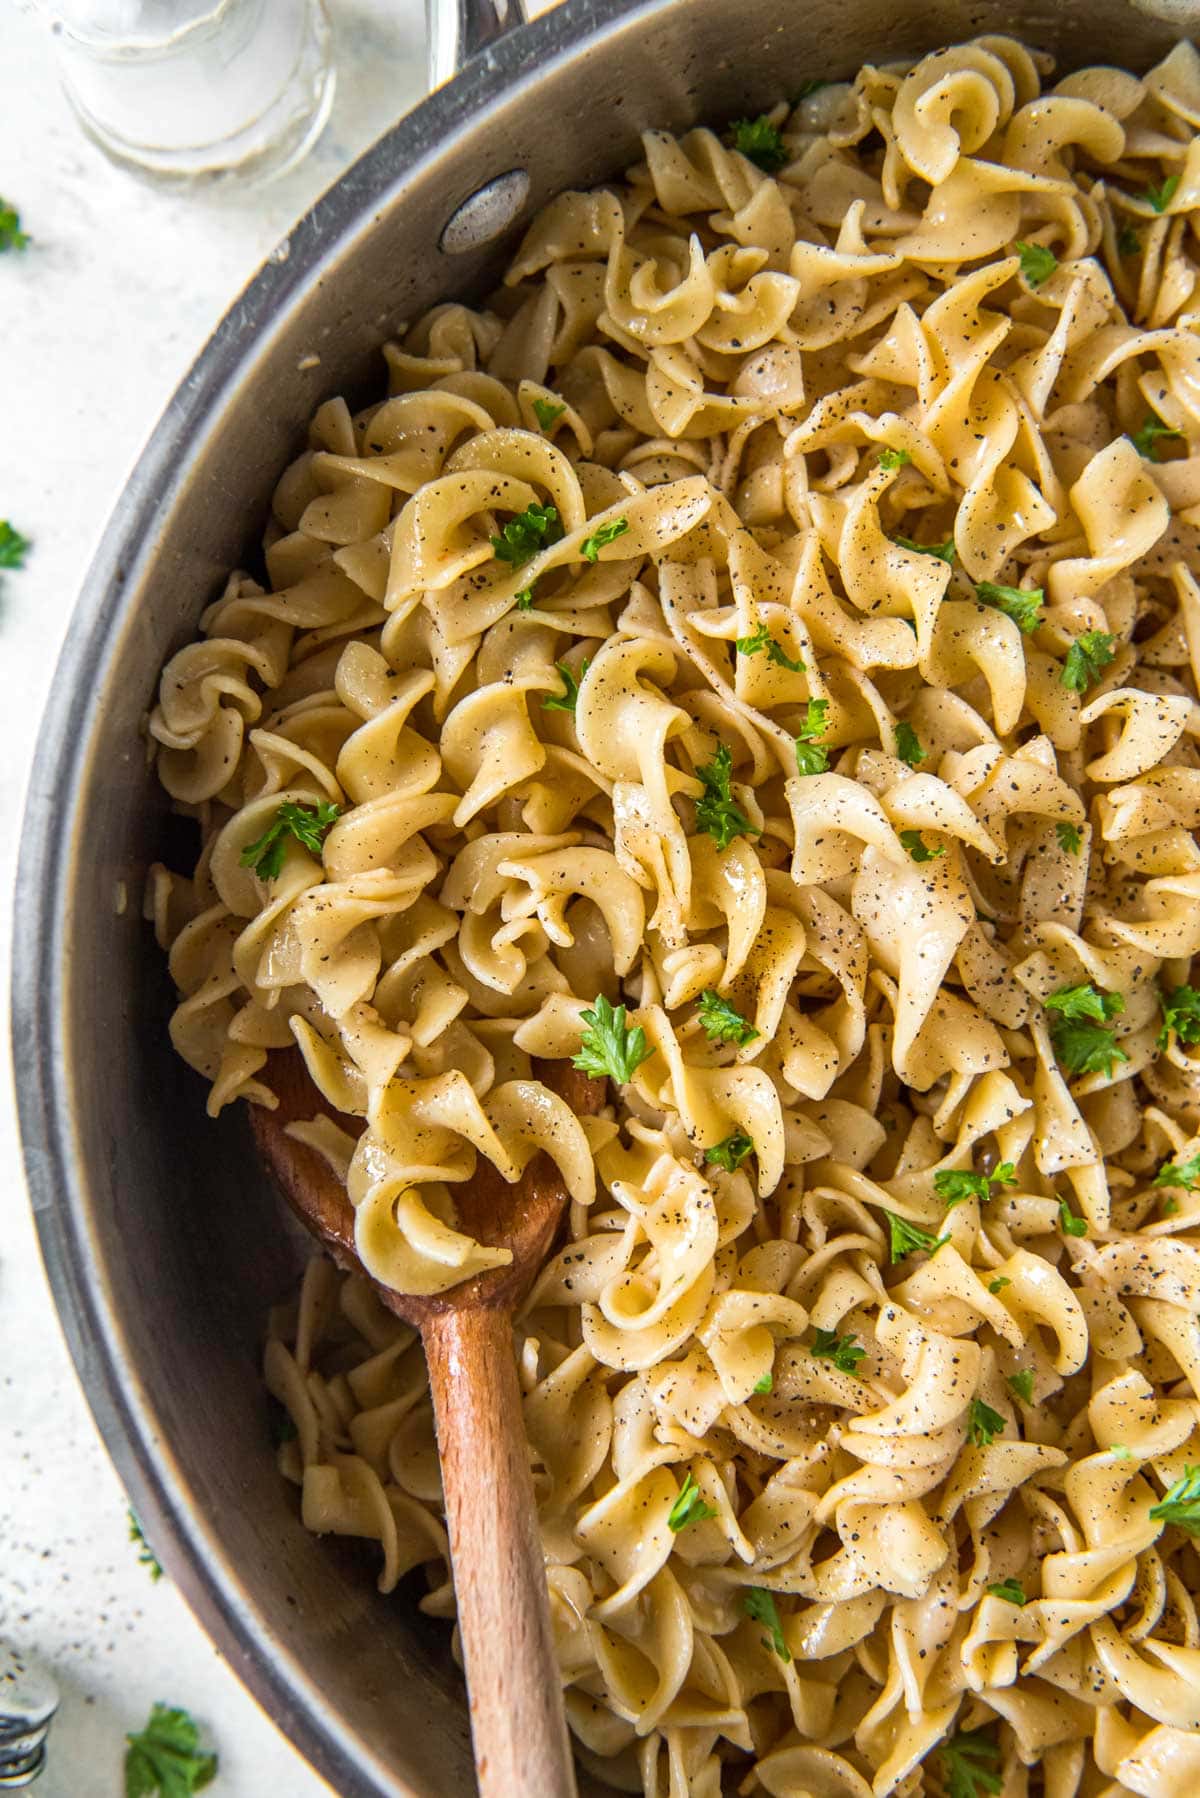 buttered noodles with parsley, wooden spoon